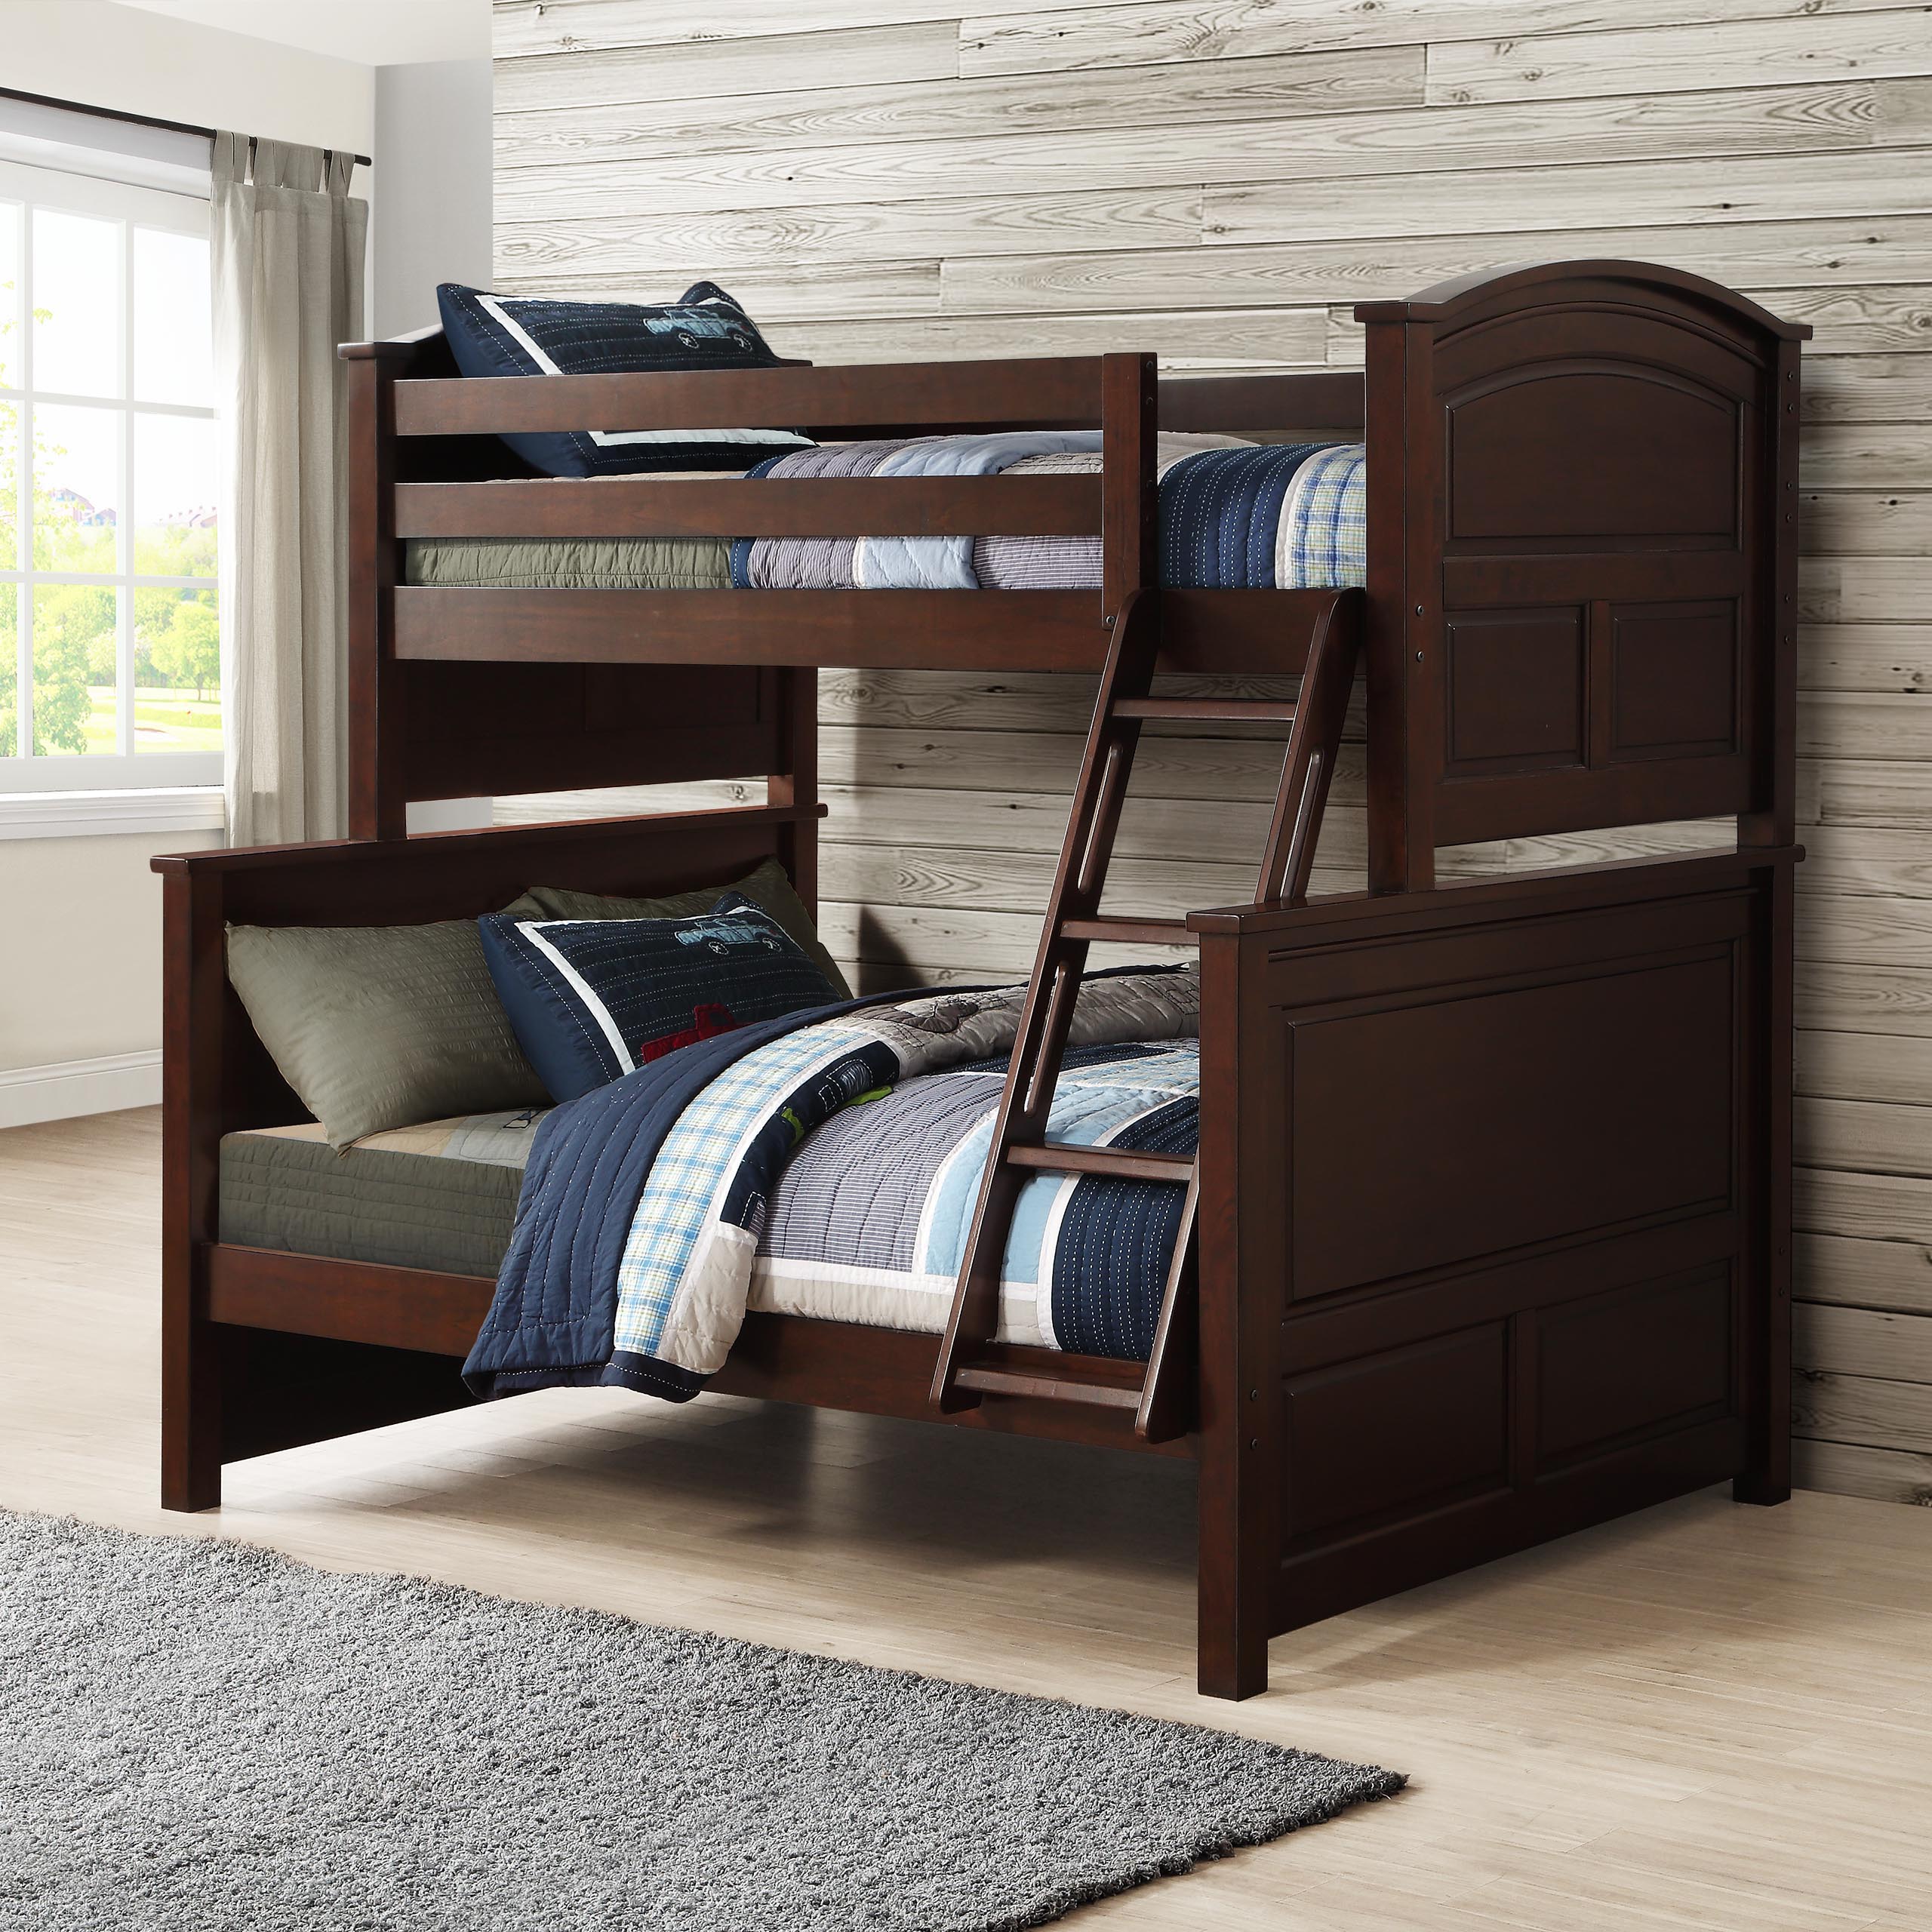 Bayside Furnishings, Whalen Bunk Bed Assembly Instructions